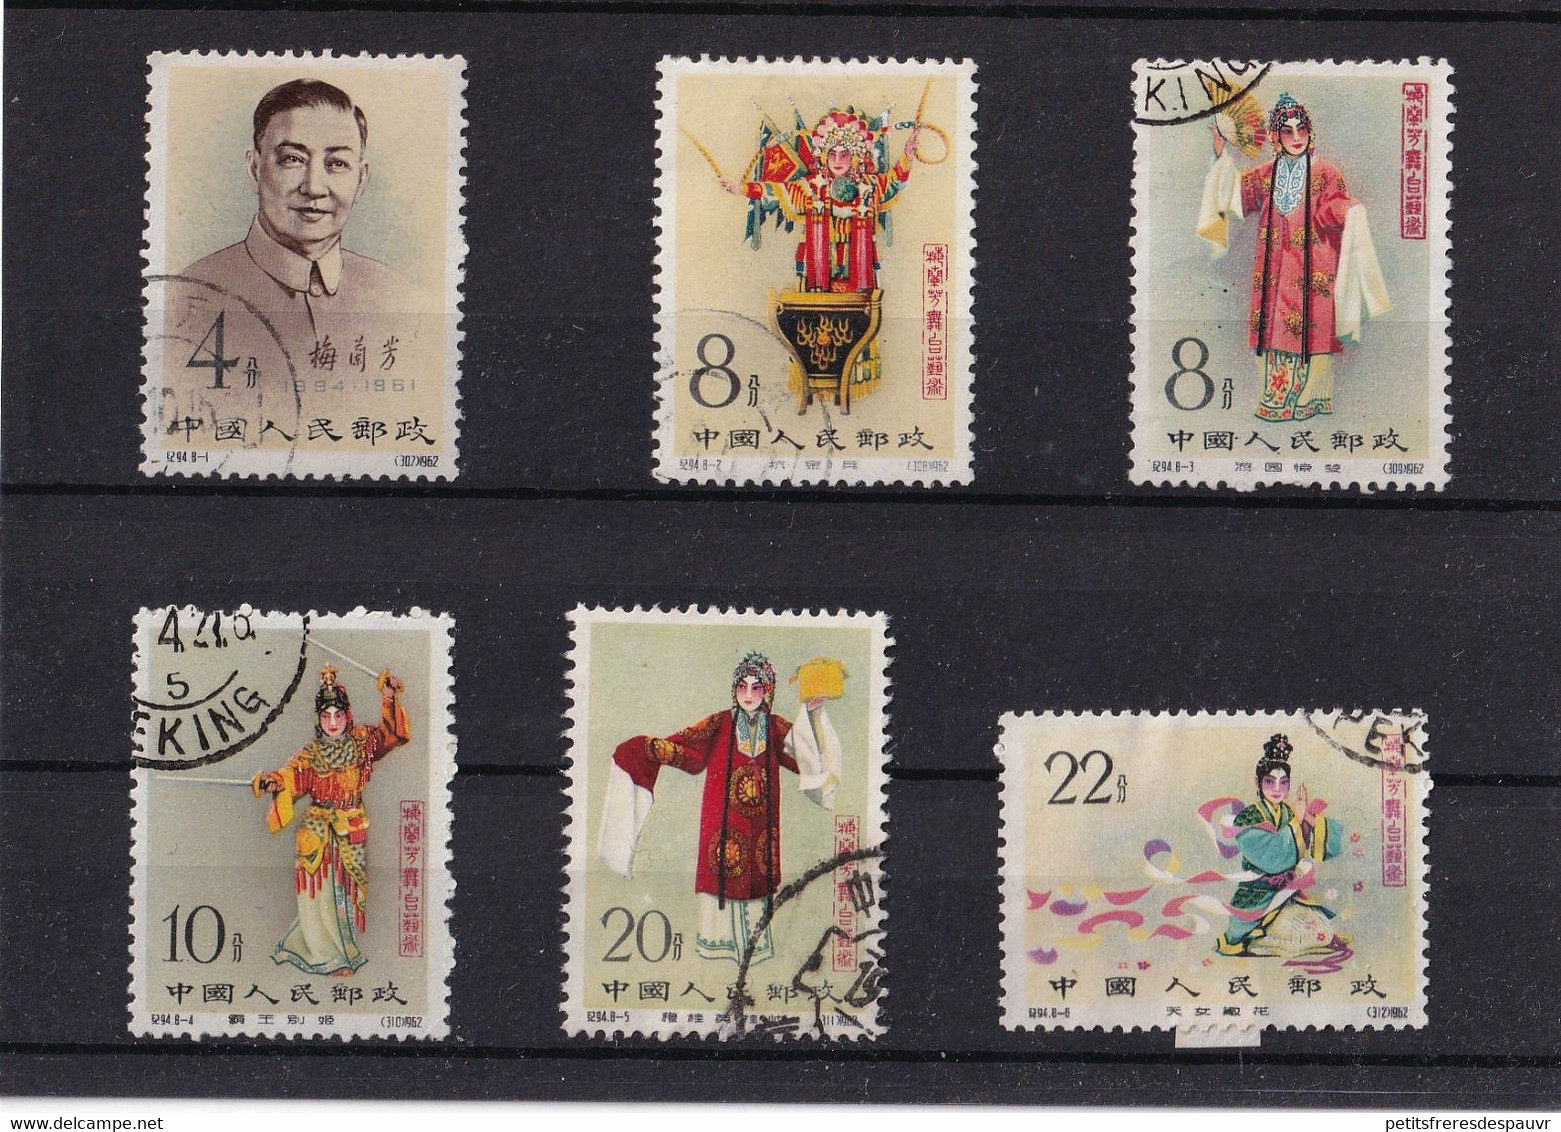 CHINA  - 1962 – Michel 648 To 653 (6 Values) – Used – Very Fine - Used Stamps